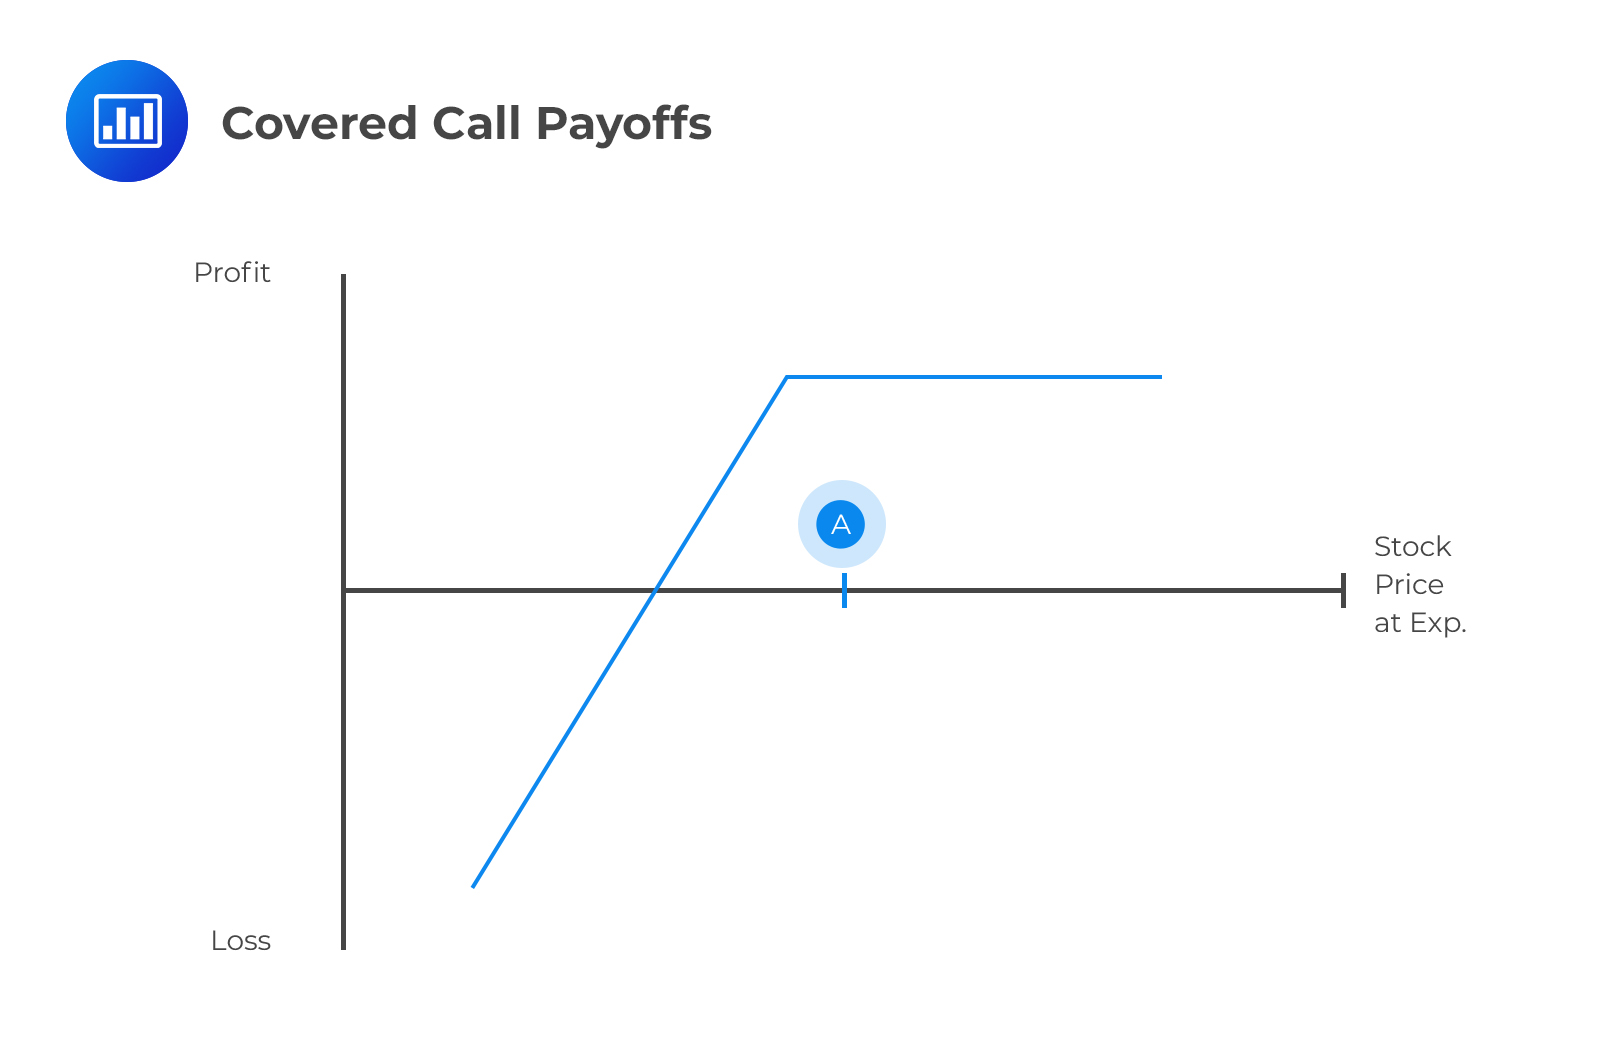 Covered Call Payoffs